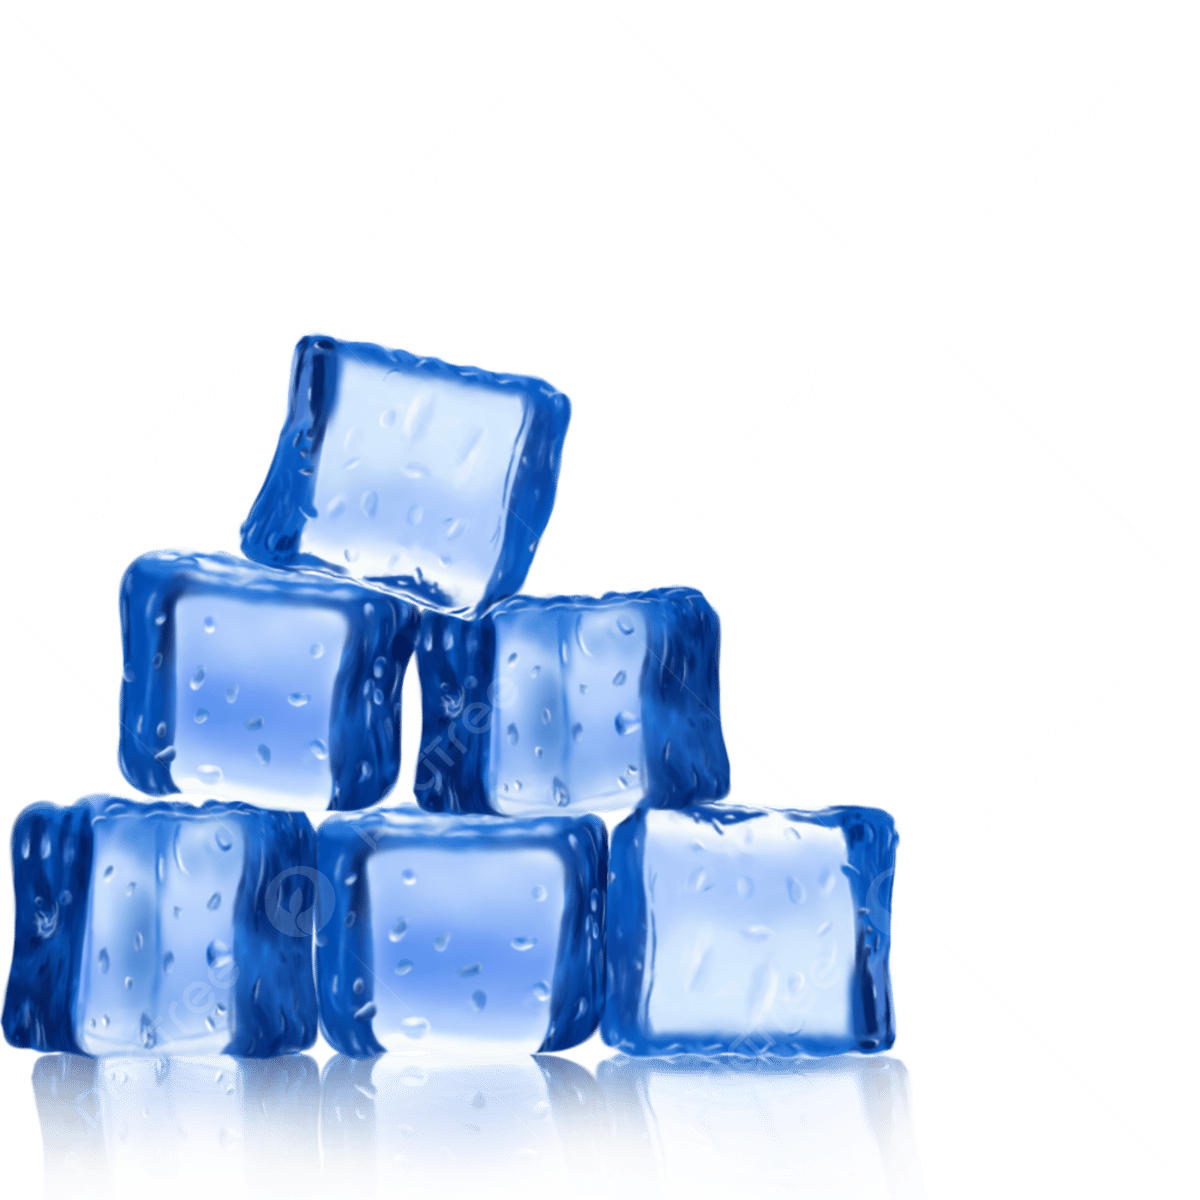 One Big Ice Cube And Three Small Ice Cubes, Ice Cream Brick, Solid Ice,  Water Ice Crystals PNG Transparent Image and Clipart for Free Download